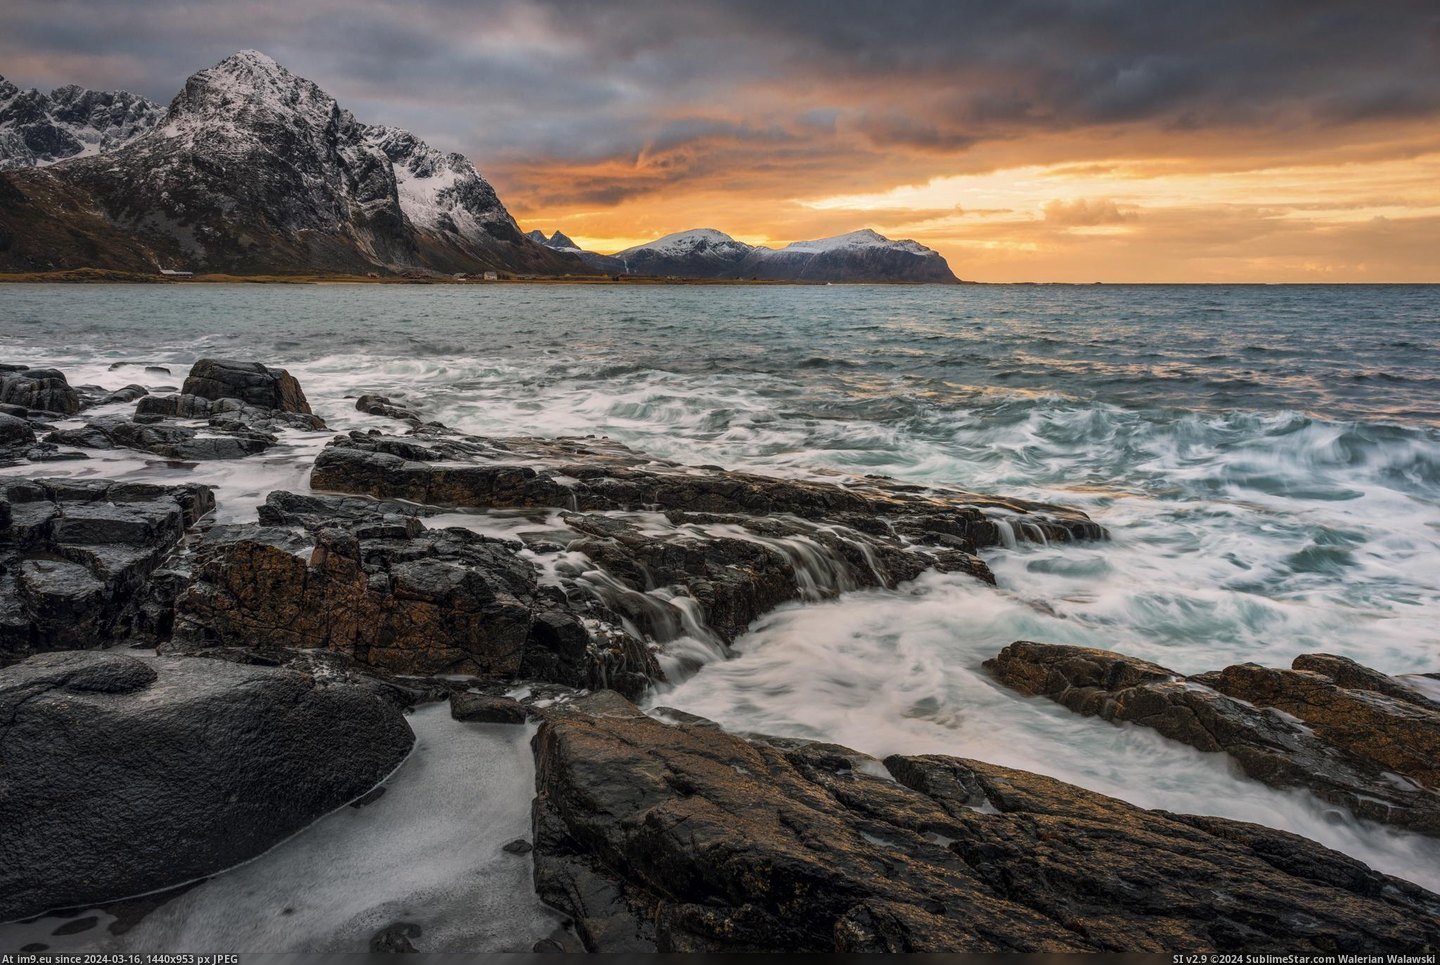 #Sunset #Winter #Wave #2048x1367 #Action #Norway [Earthporn]  A winter sunset with some of wave action near Ramberg, Norway [2048x1367] Pic. (Obraz z album My r/EARTHPORN favs))